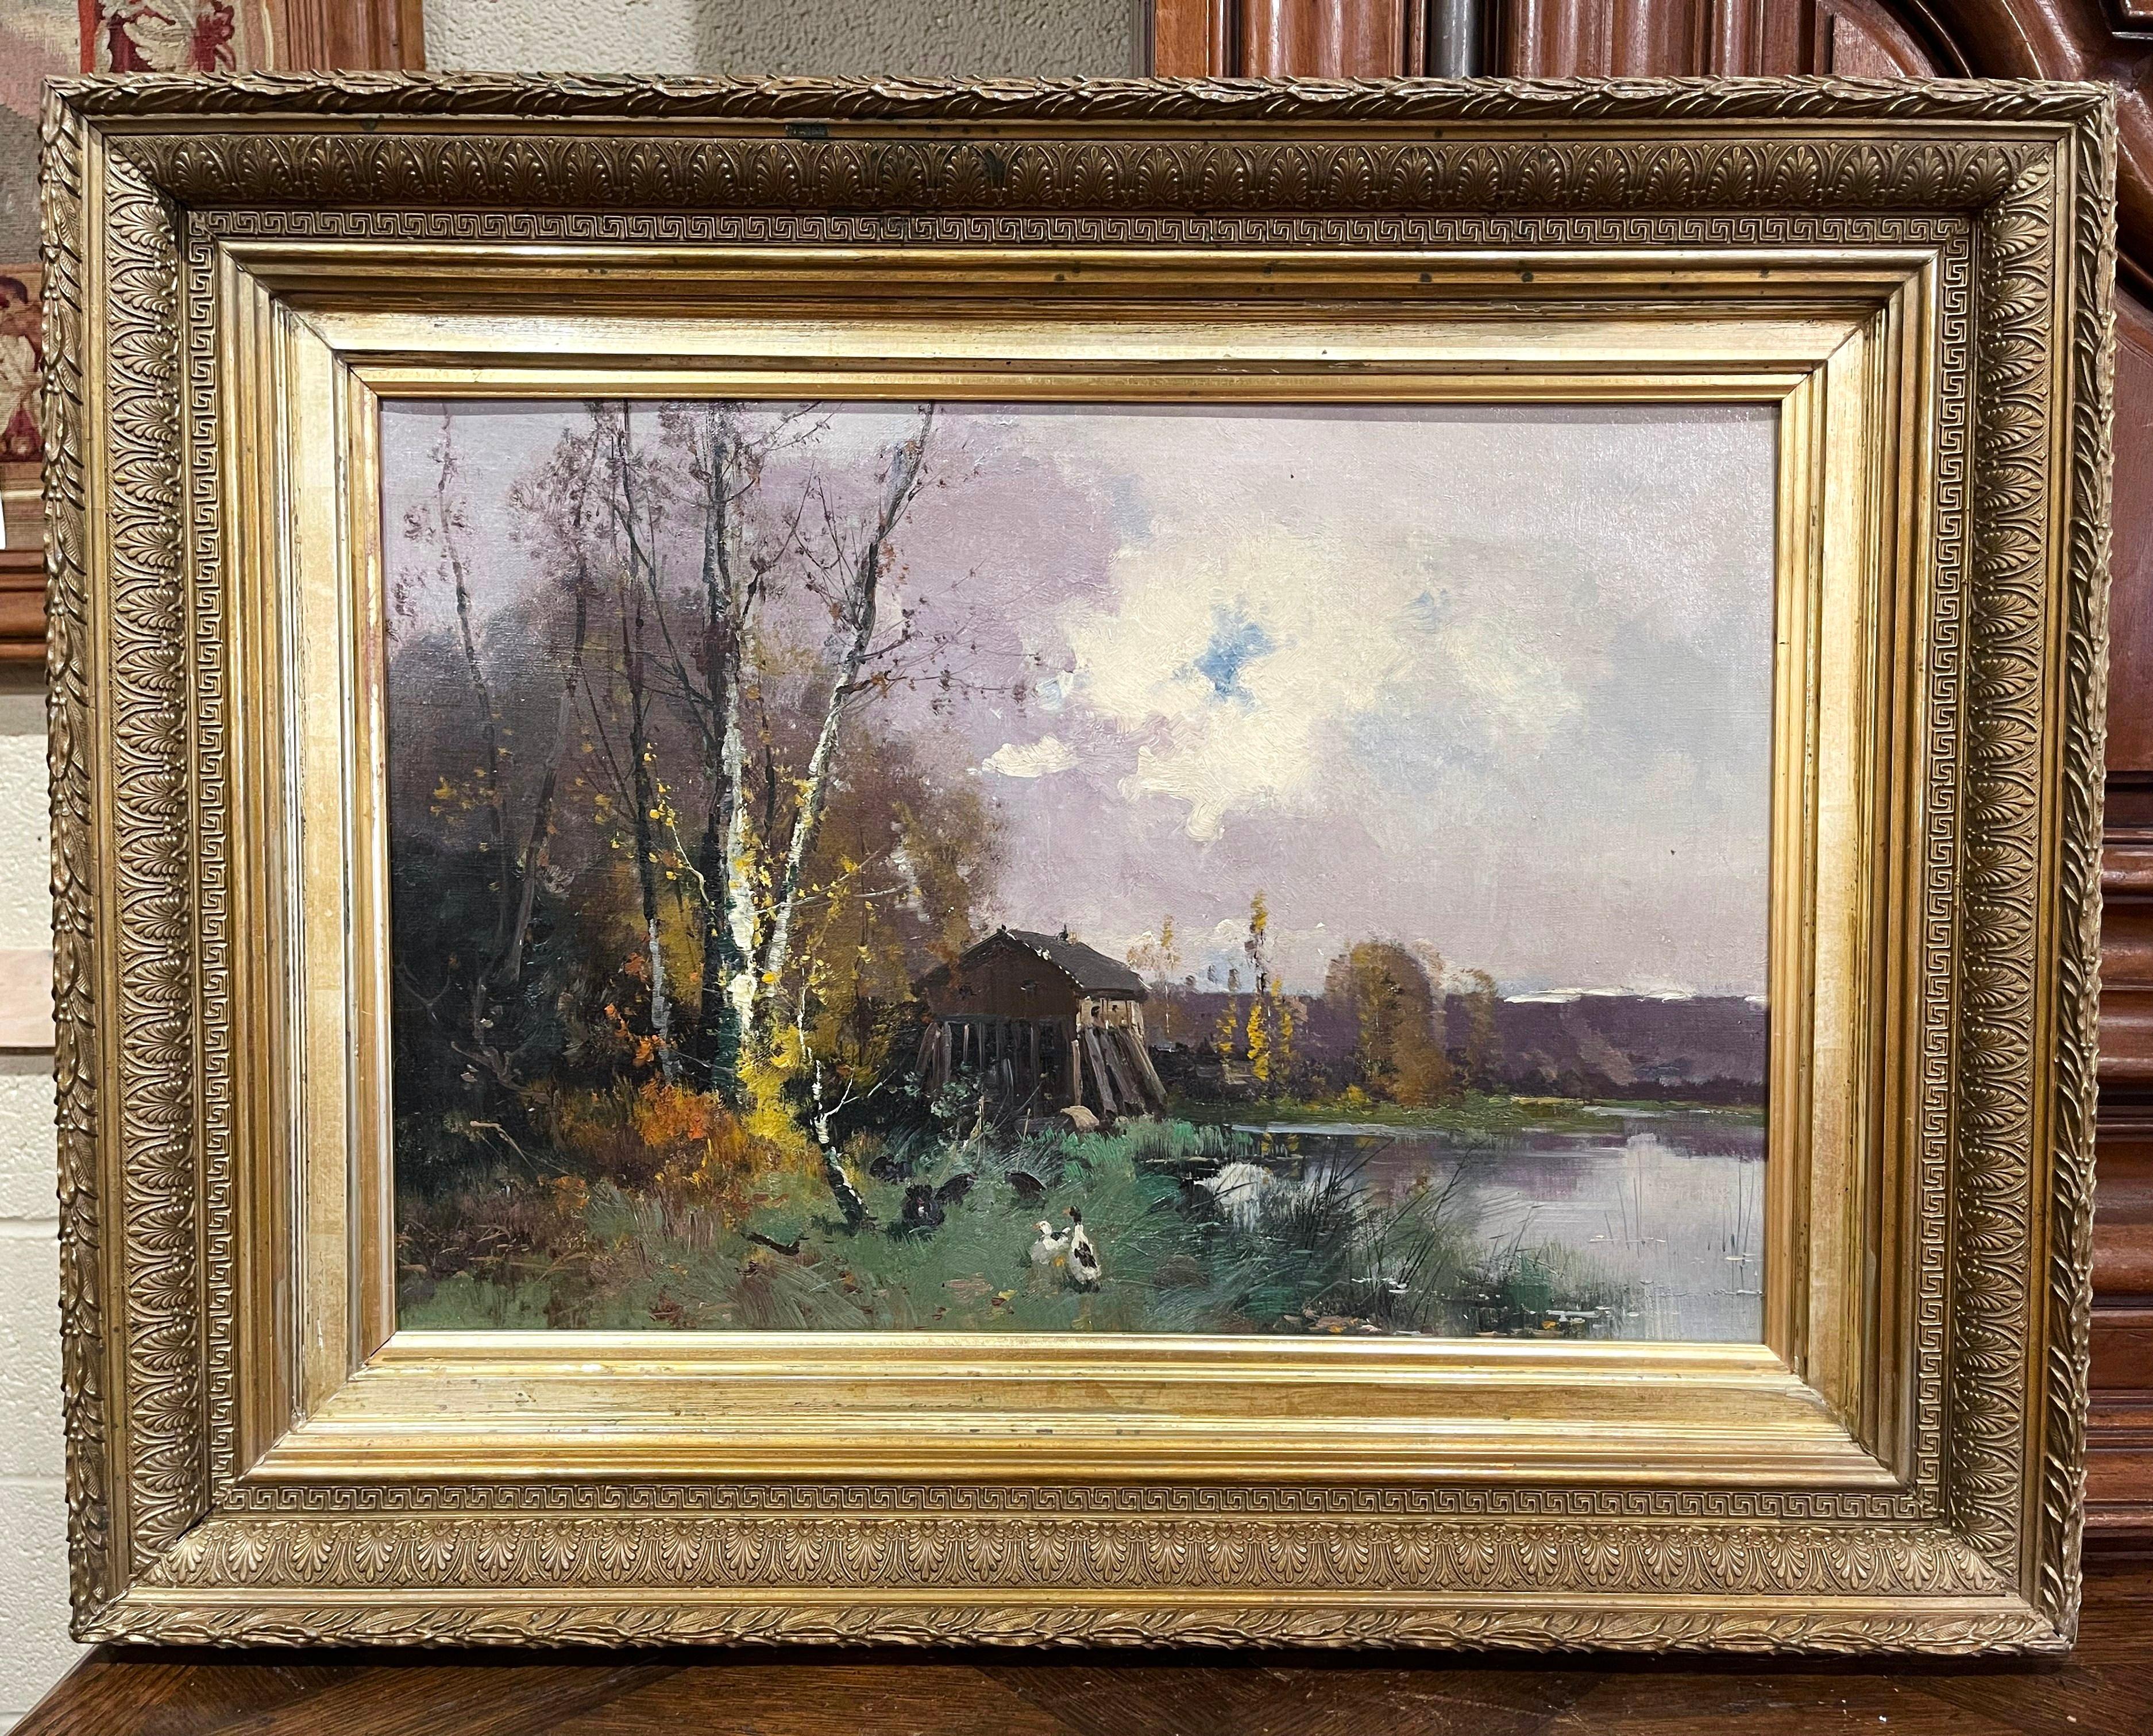 19th Century French Oil Painting on Canvas in Gilt Frame Signed E. Galien-Laloue For Sale 1